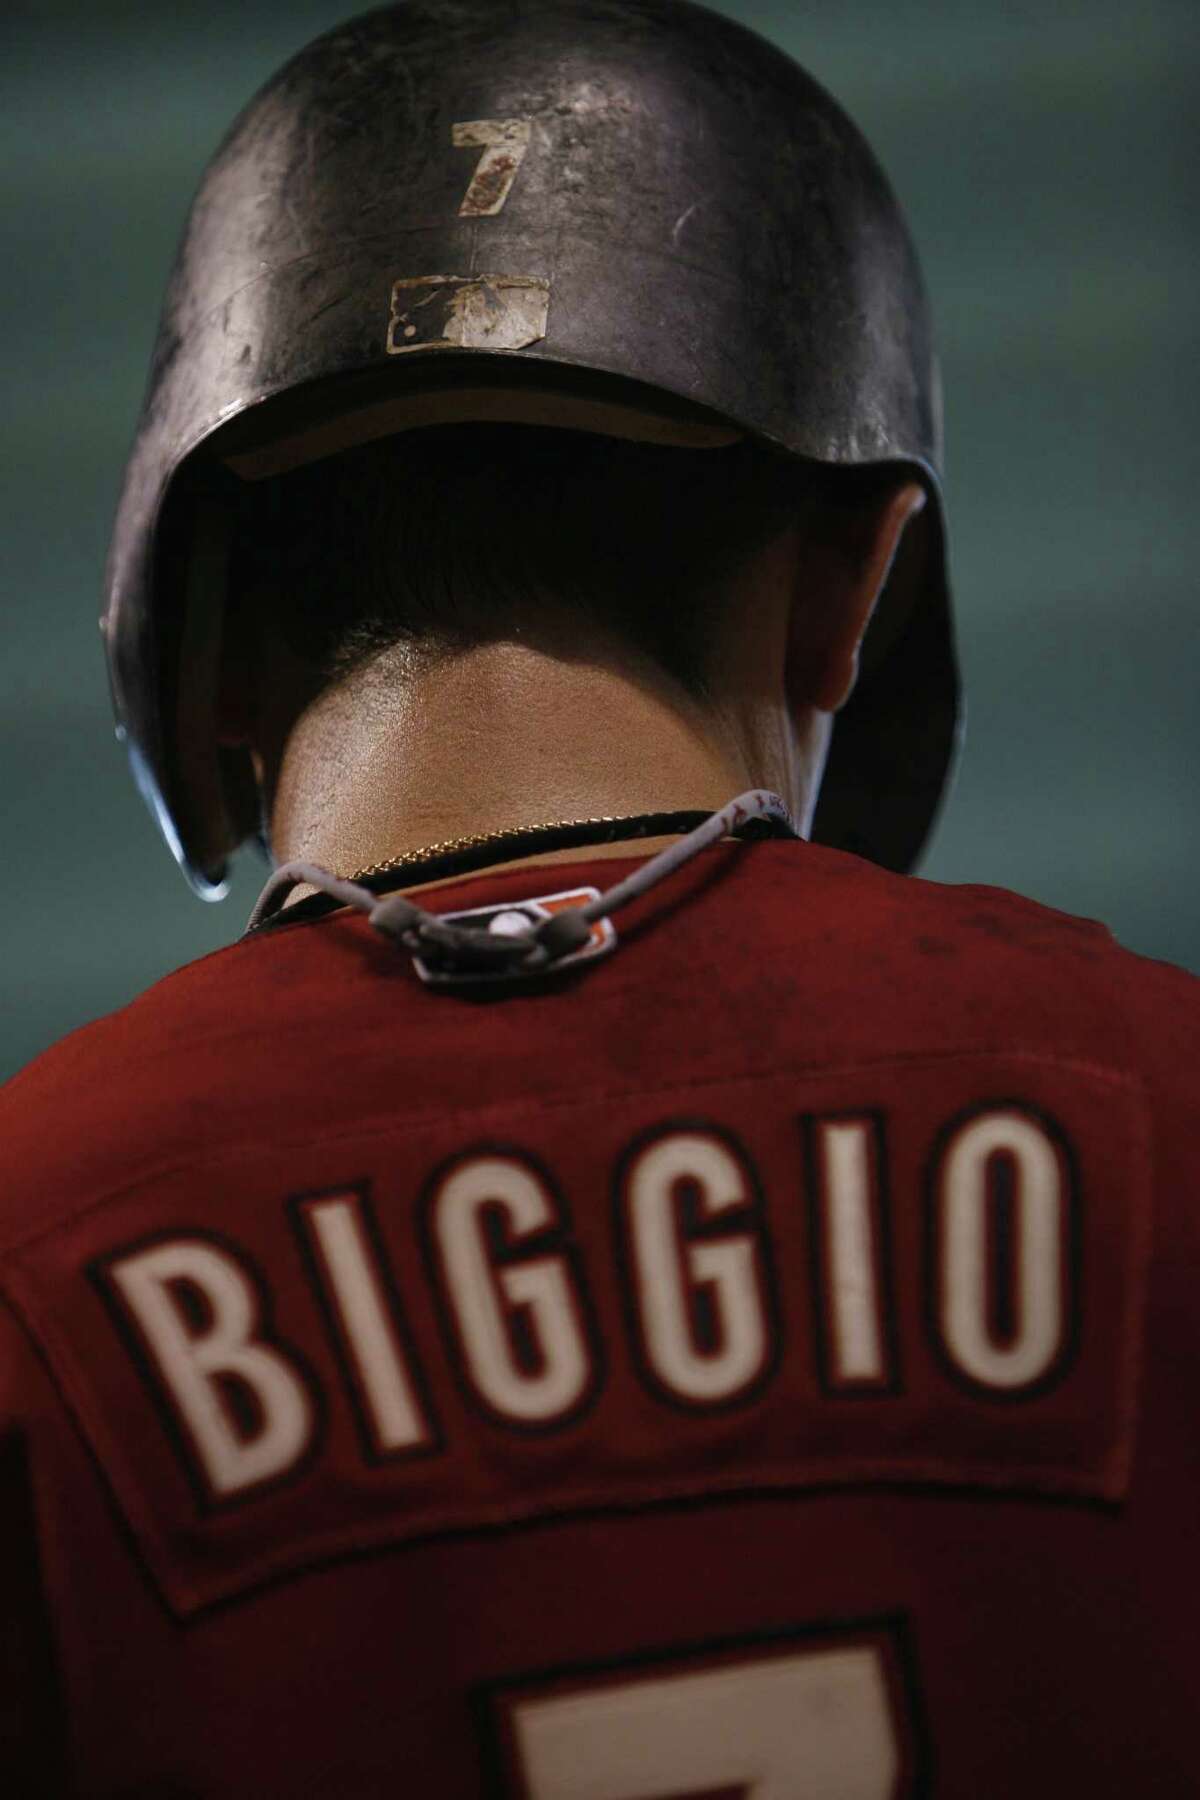 Craig Biggio will become the first player to enter the Hall of Fame as an Astro at the ceremony Sunday.﻿